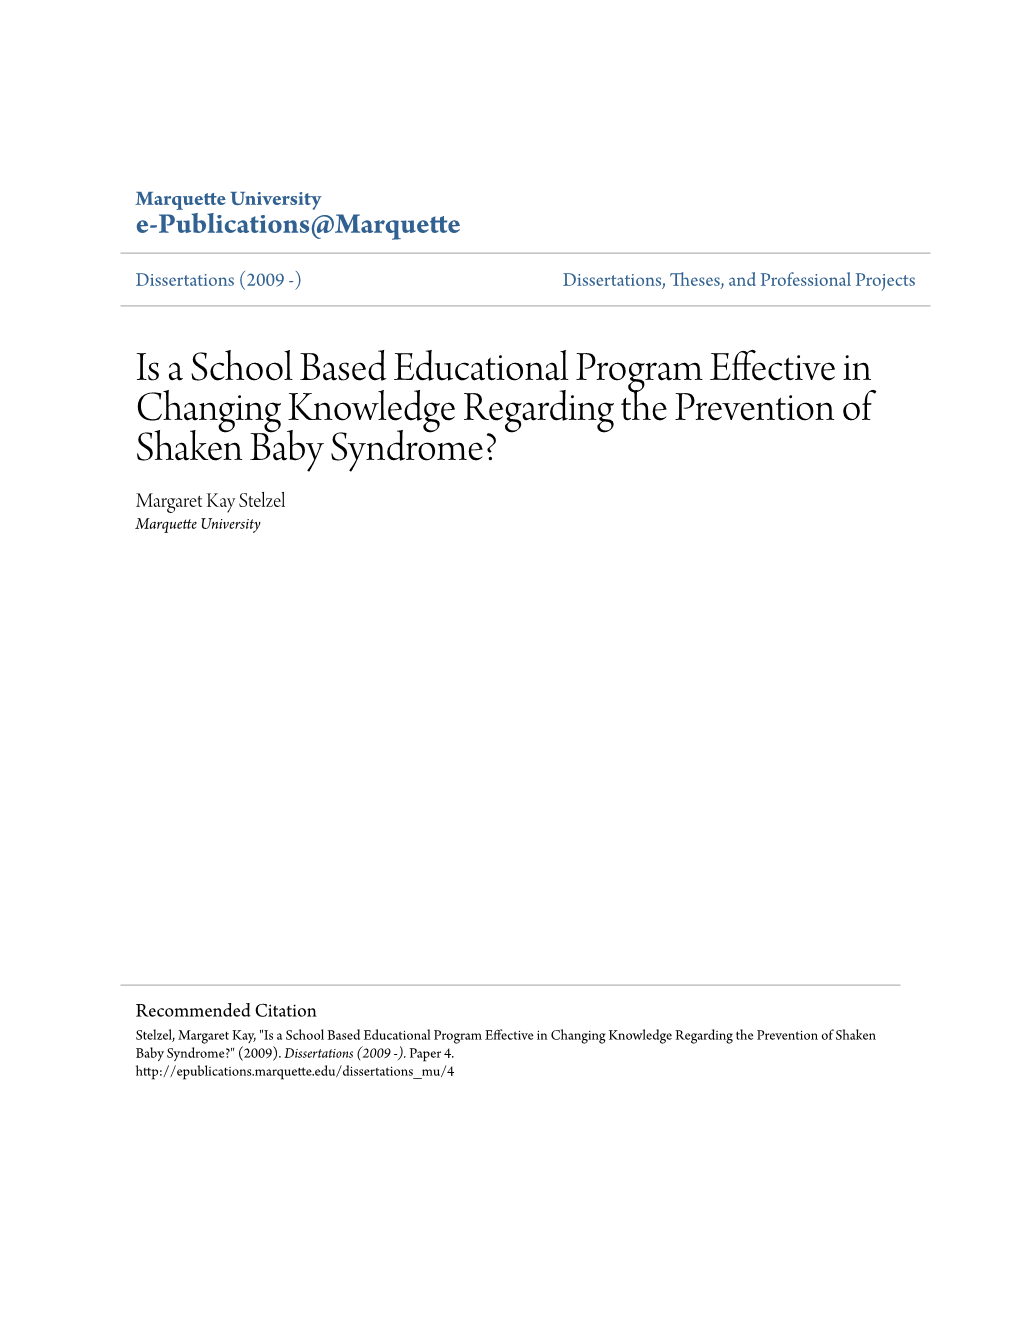 Is a School Based Educational Program Effective in Changing Knowledge Regarding the Prevention of Shaken Baby Syndrome? Margaret Kay Stelzel Marquette University